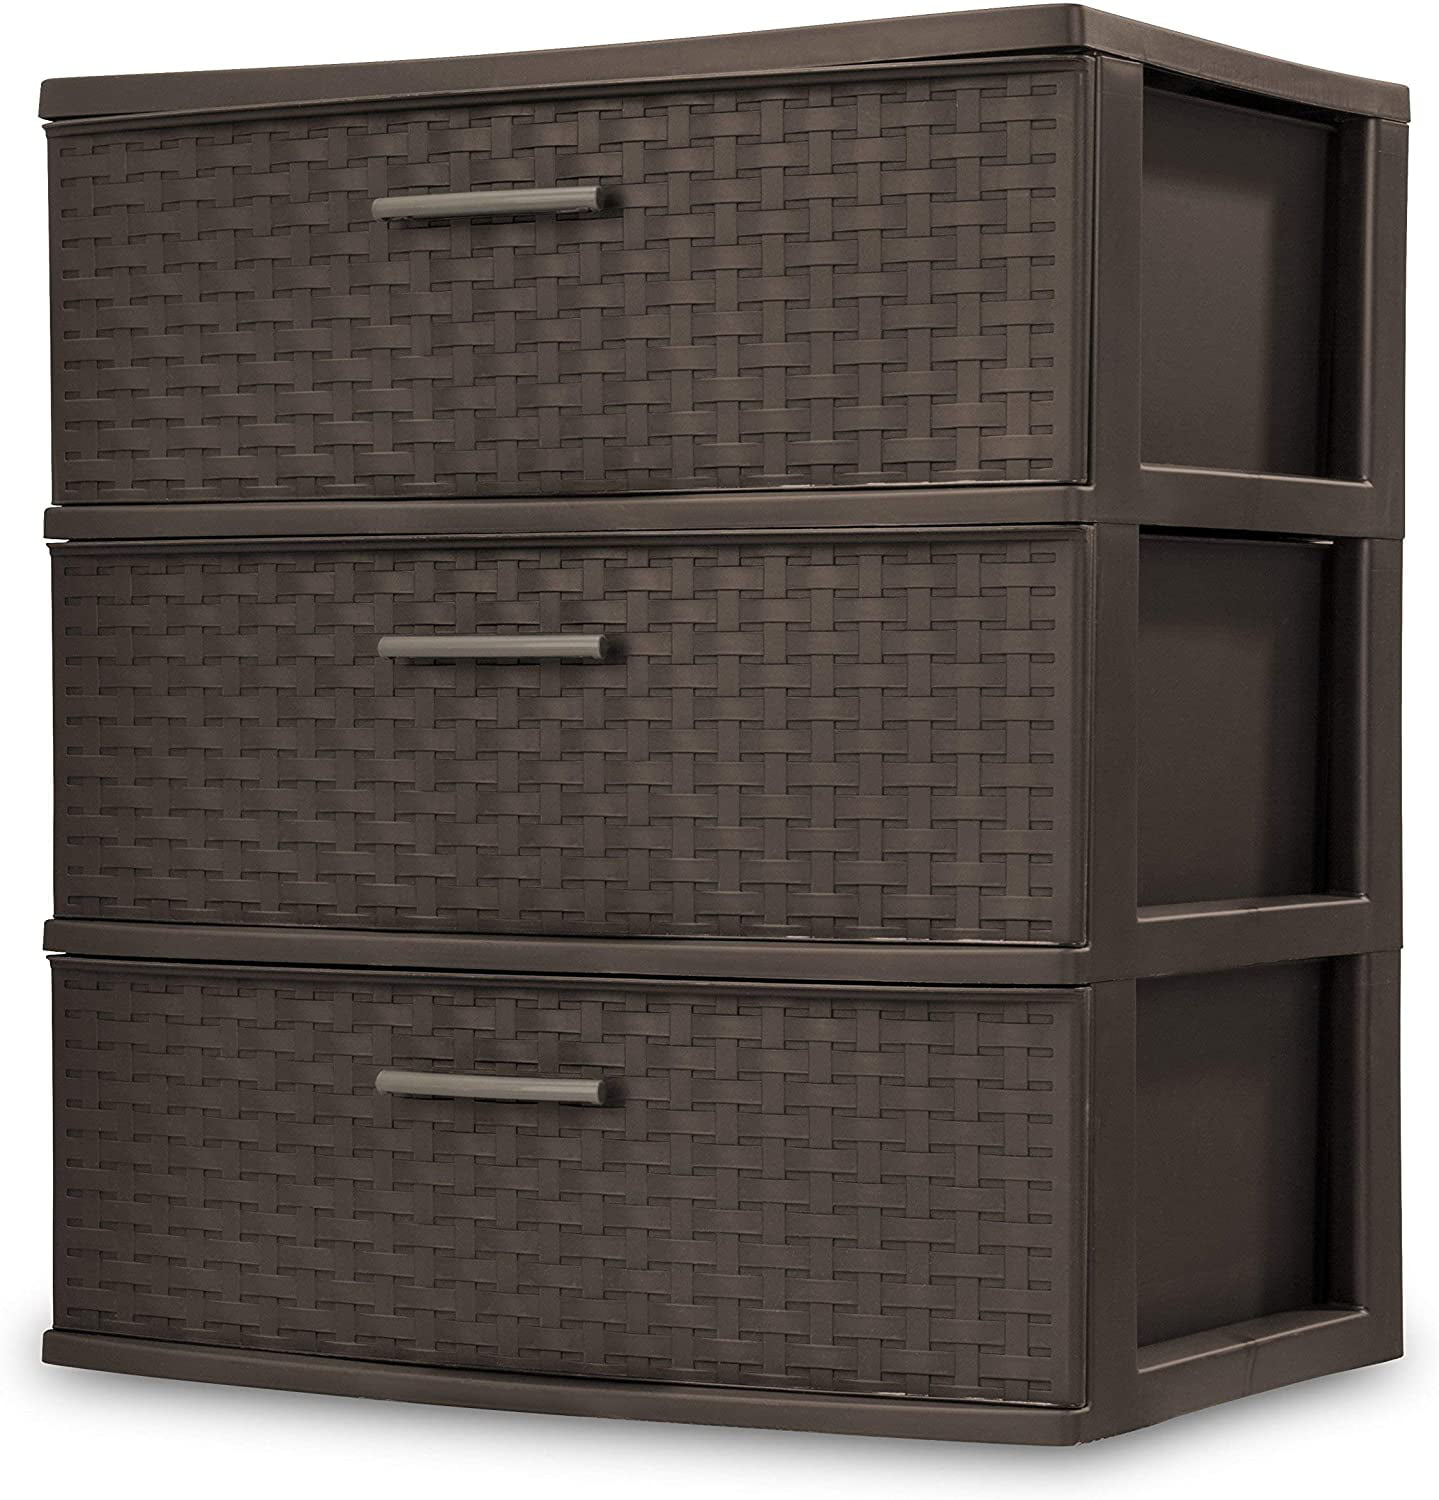 Espresso Frame & Drawers w/Driftwood Handles 21.63 Inches, 2-Pack STERILITE 25306P01 3 Drawer Wide Weave Tower